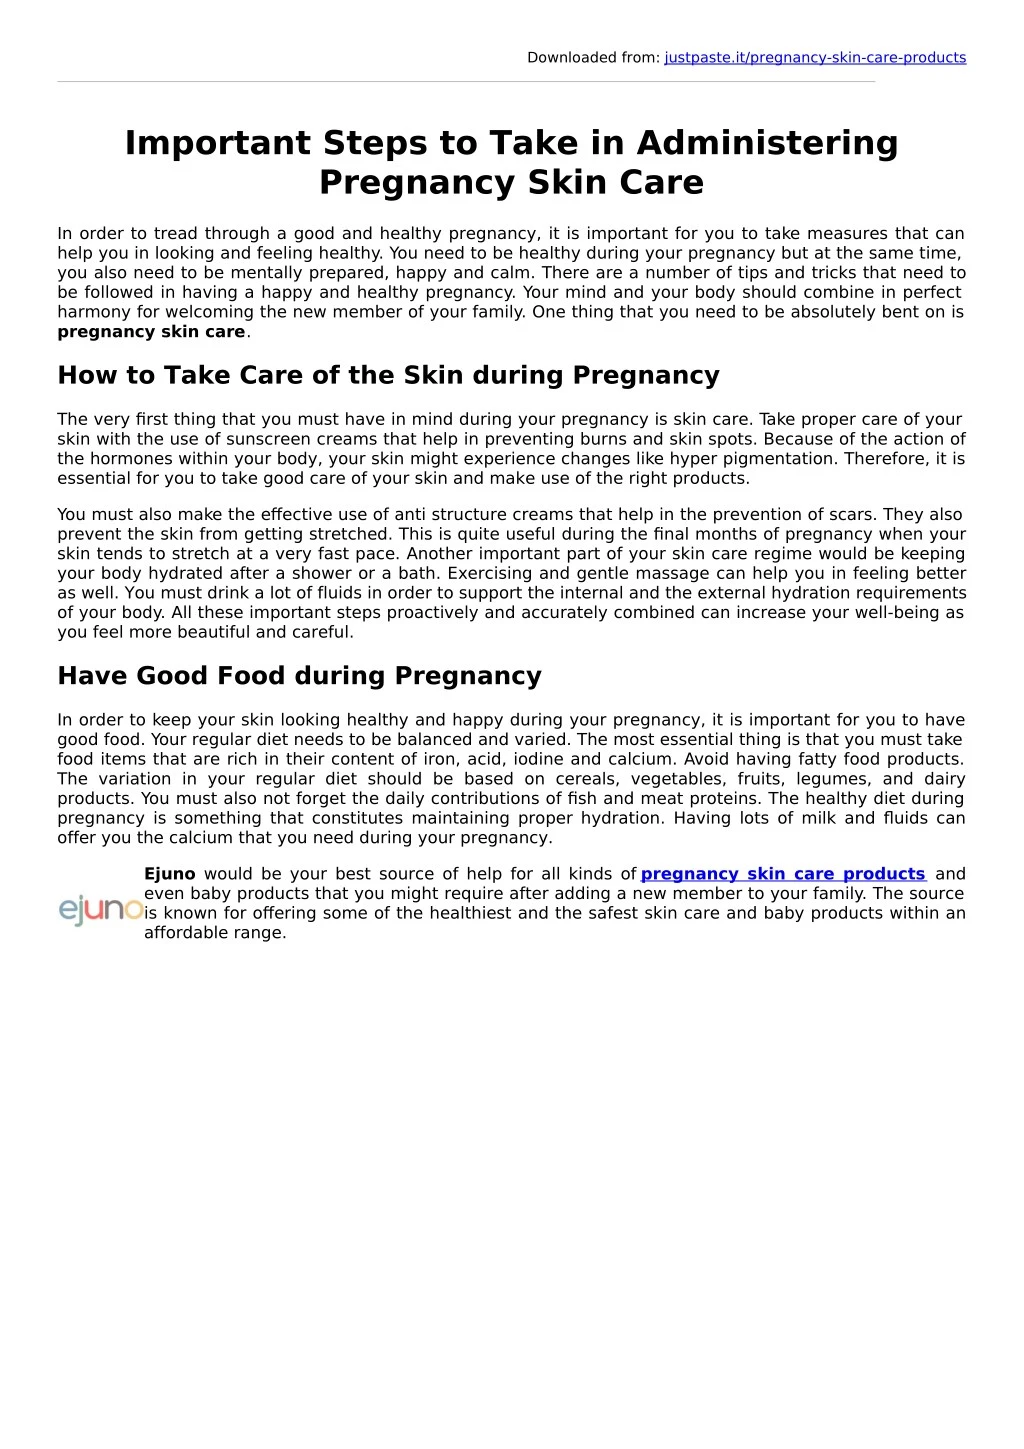 downloaded from justpaste it pregnancy skin care